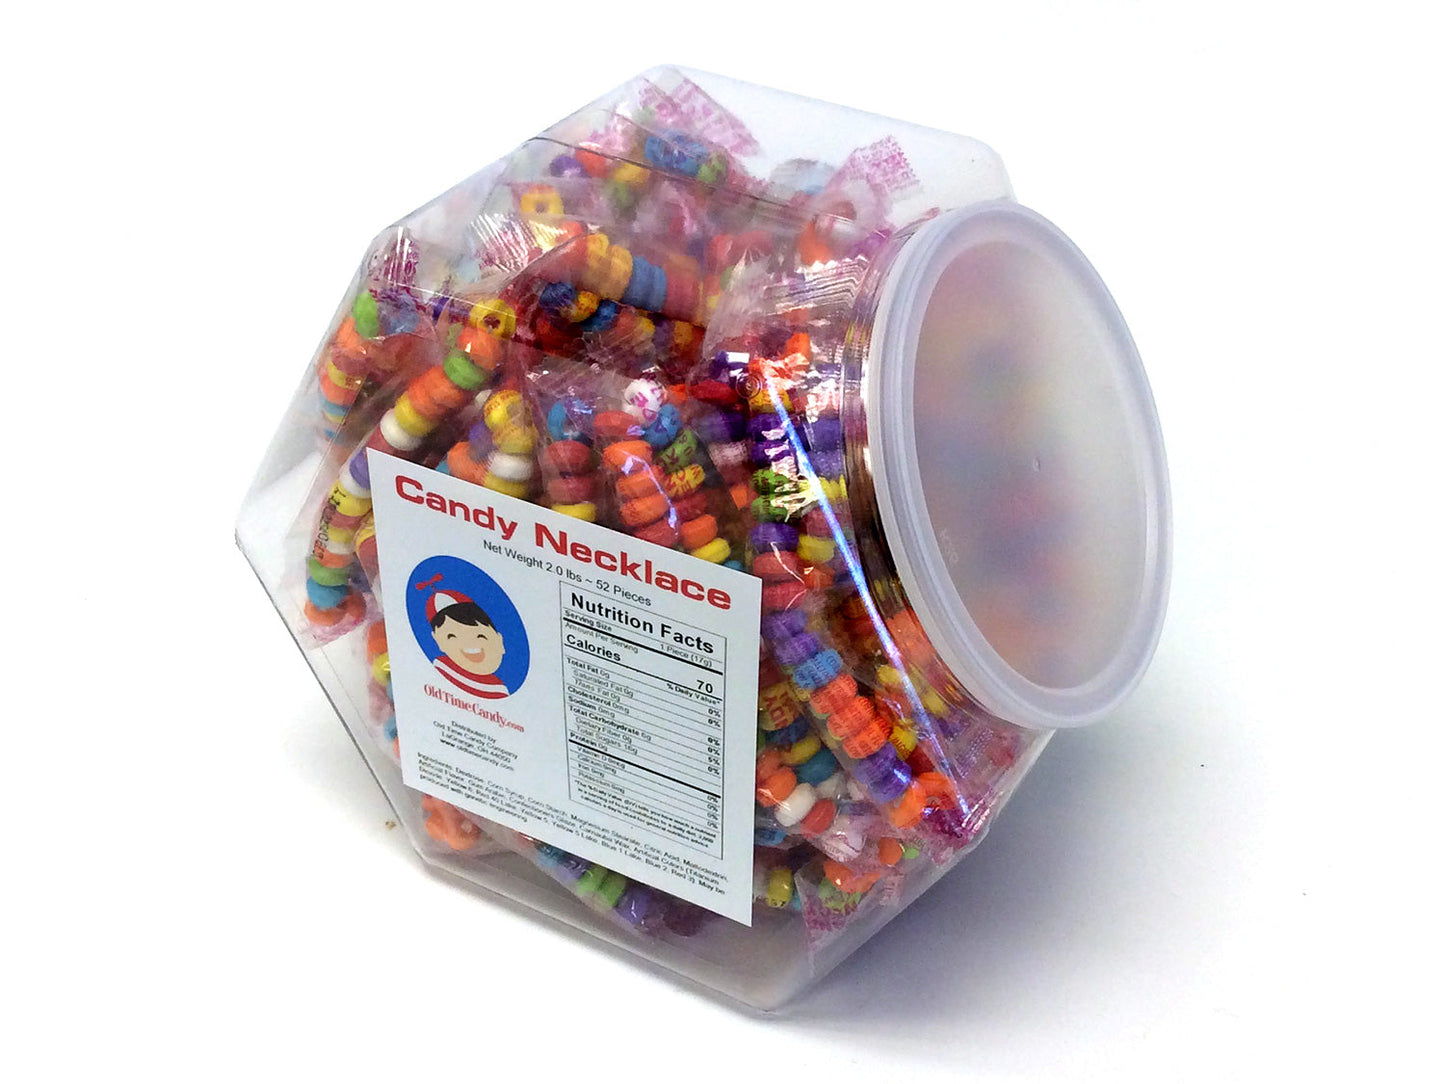 Candy Necklace - wrapped - plastic tub of 52